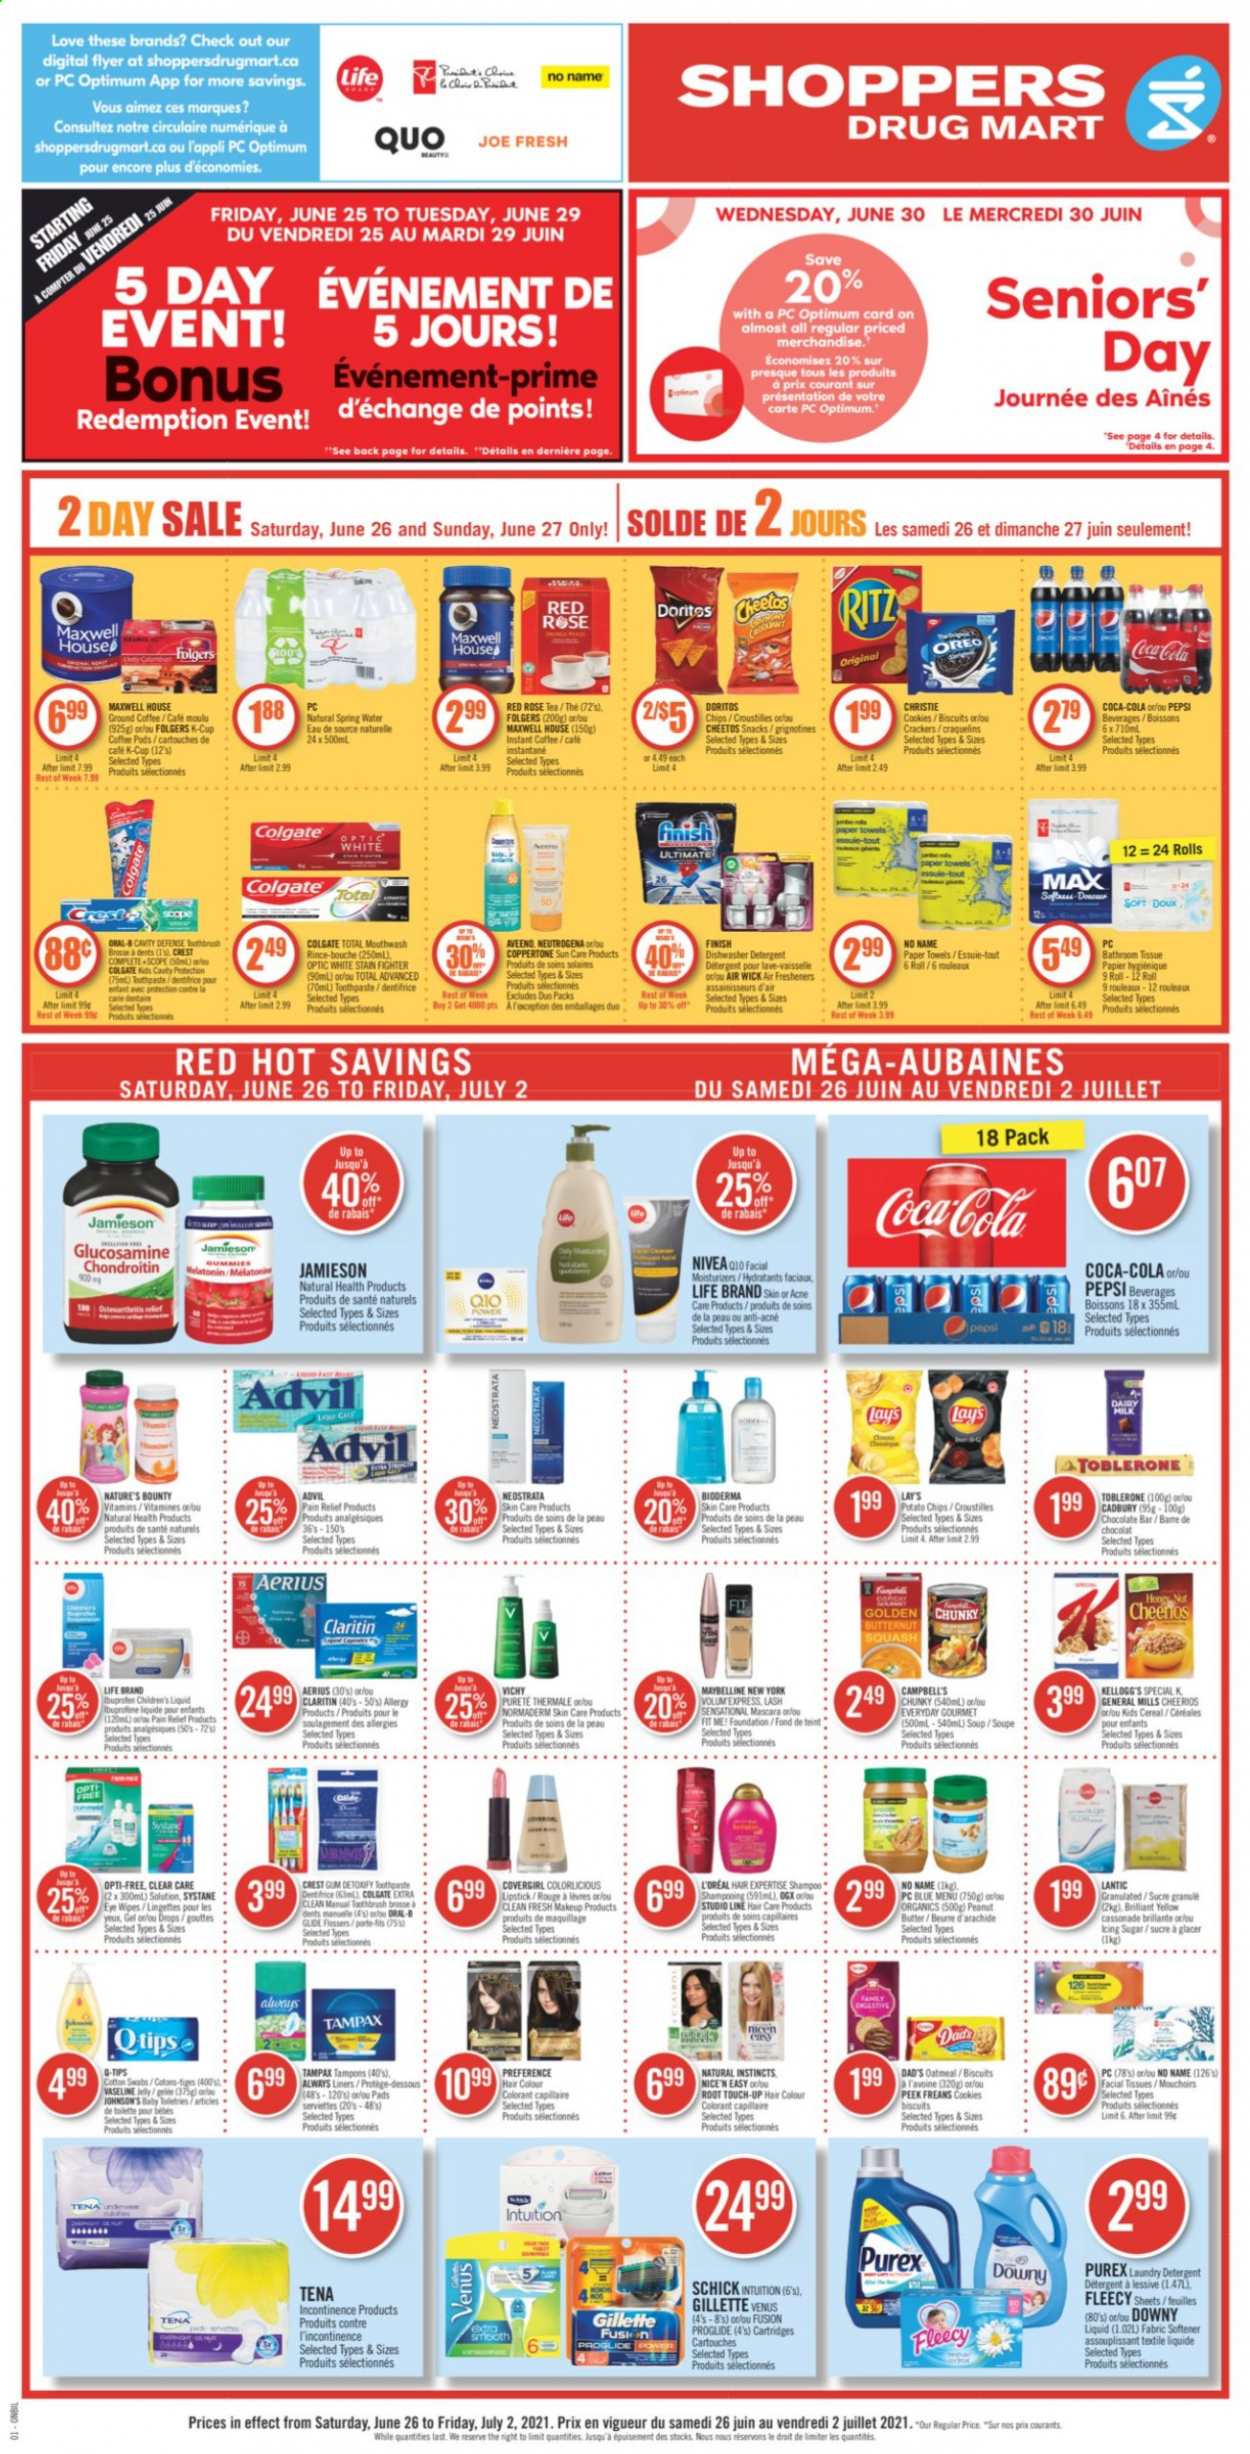 thumbnail - Shoppers Drug Mart Flyer - June 26, 2021 - July 02, 2021 - Sales products - cookies, snack, jelly, crackers, Kellogg's, biscuit, Toblerone, Cadbury, Dairy Milk, RITZ, chocolate bar, Doritos, Cheetos, Lay’s, sugar, oatmeal, icing sugar, soup, cereals, Cheerios, Campbell's, peanut butter, Coca-Cola, Pepsi, spring water, Maxwell House, tea, coffee pods, instant coffee, Folgers, ground coffee, coffee capsules, K-Cups, wipes, Johnson's, Aveeno, bath tissue, Always liners, kitchen towels, paper towels, fabric softener, laundry detergent, Purex, Downy Laundry, Vichy, Vaseline, toothbrush, toothpaste, mouthwash, Crest, tampons, facial tissues, L’Oréal, OGX, Root Touch-Up, hair color, Schick, Venus, lipstick, makeup, pain relief, Clear Care, glucosamine, Melatonin, Nature's Bounty, Advil Rapid, Oreo, Gillette, mascara, Maybelline, Neutrogena, Systane, Tampax, Nivea, Oral-B, chips. Page 1.